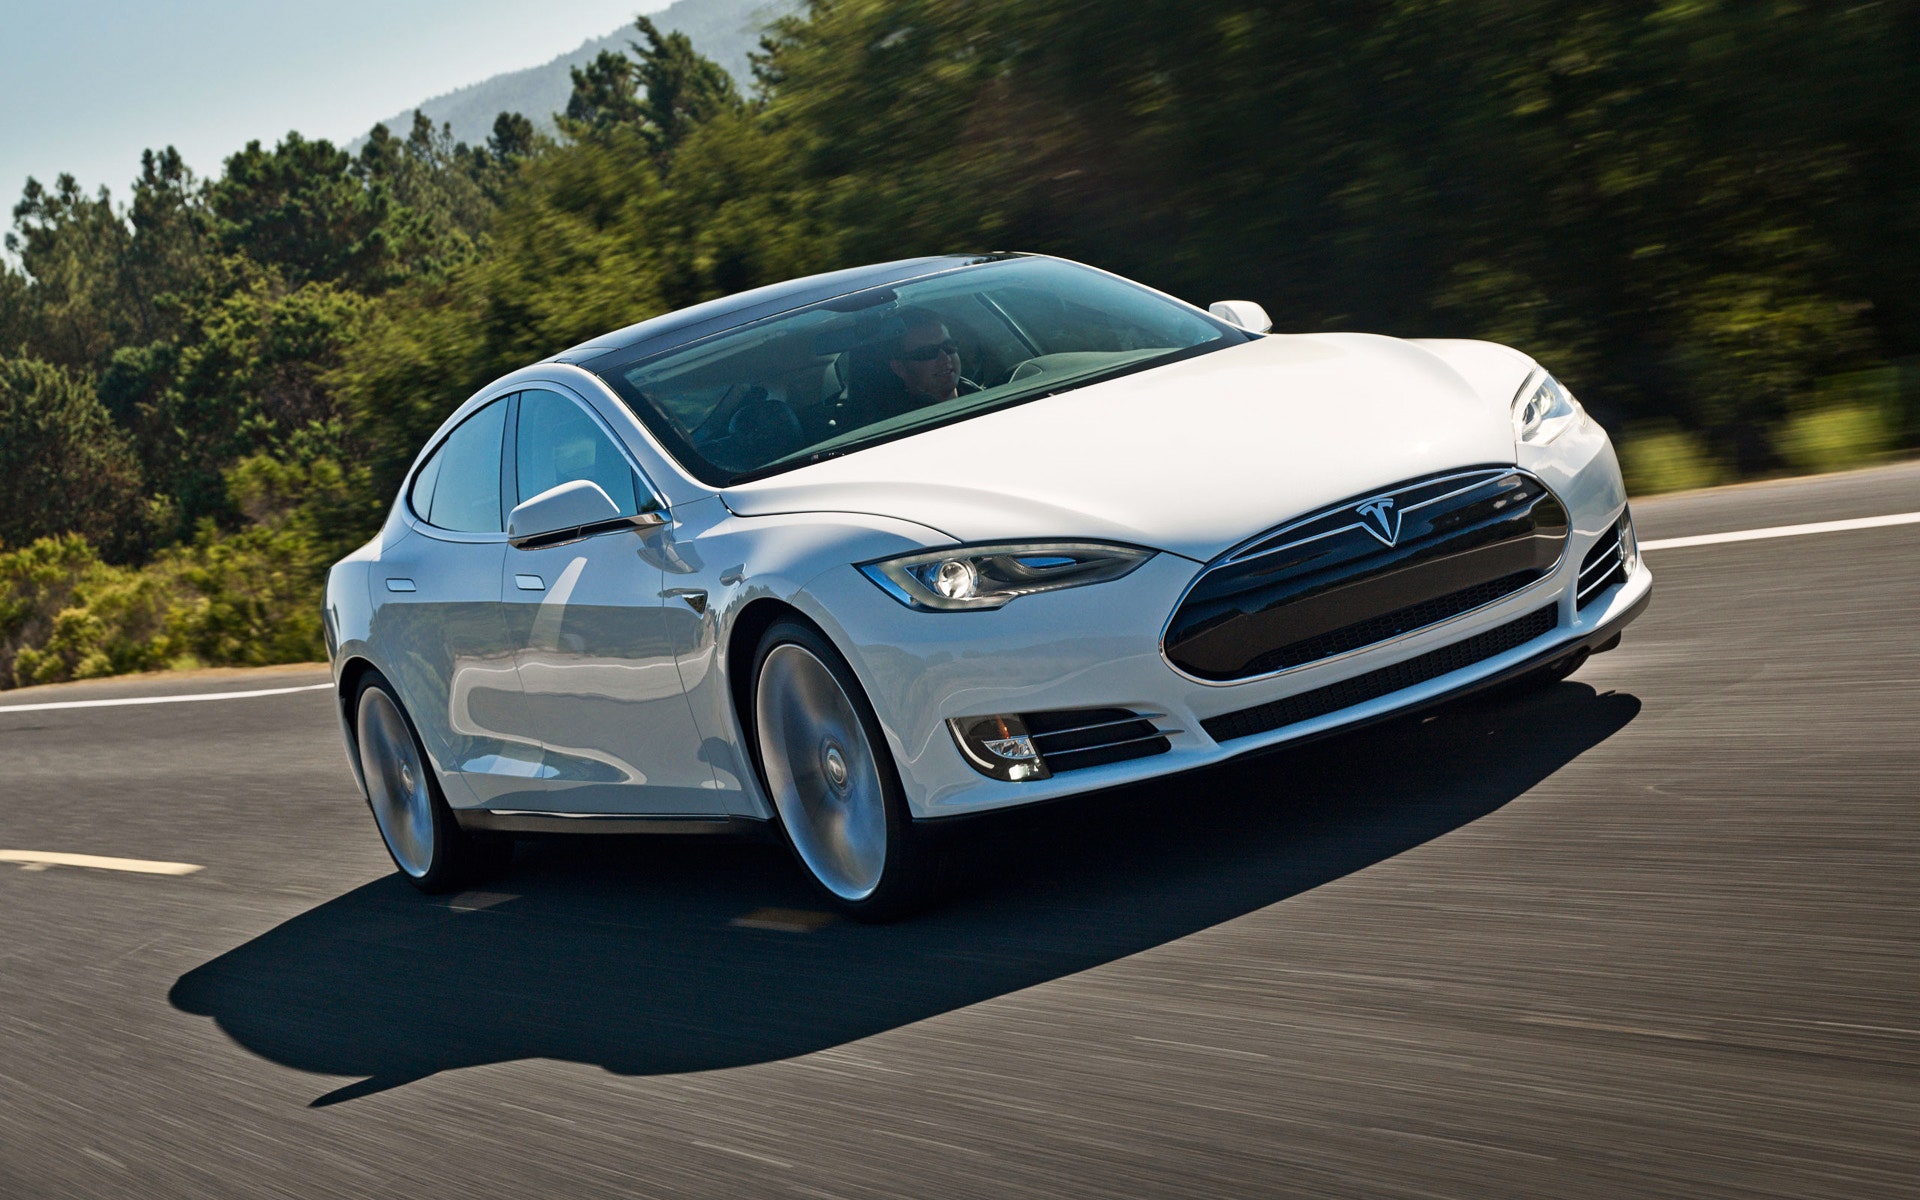 Researchers Hacked a Model S, But Tesla's Already Released a Patch | WIRED